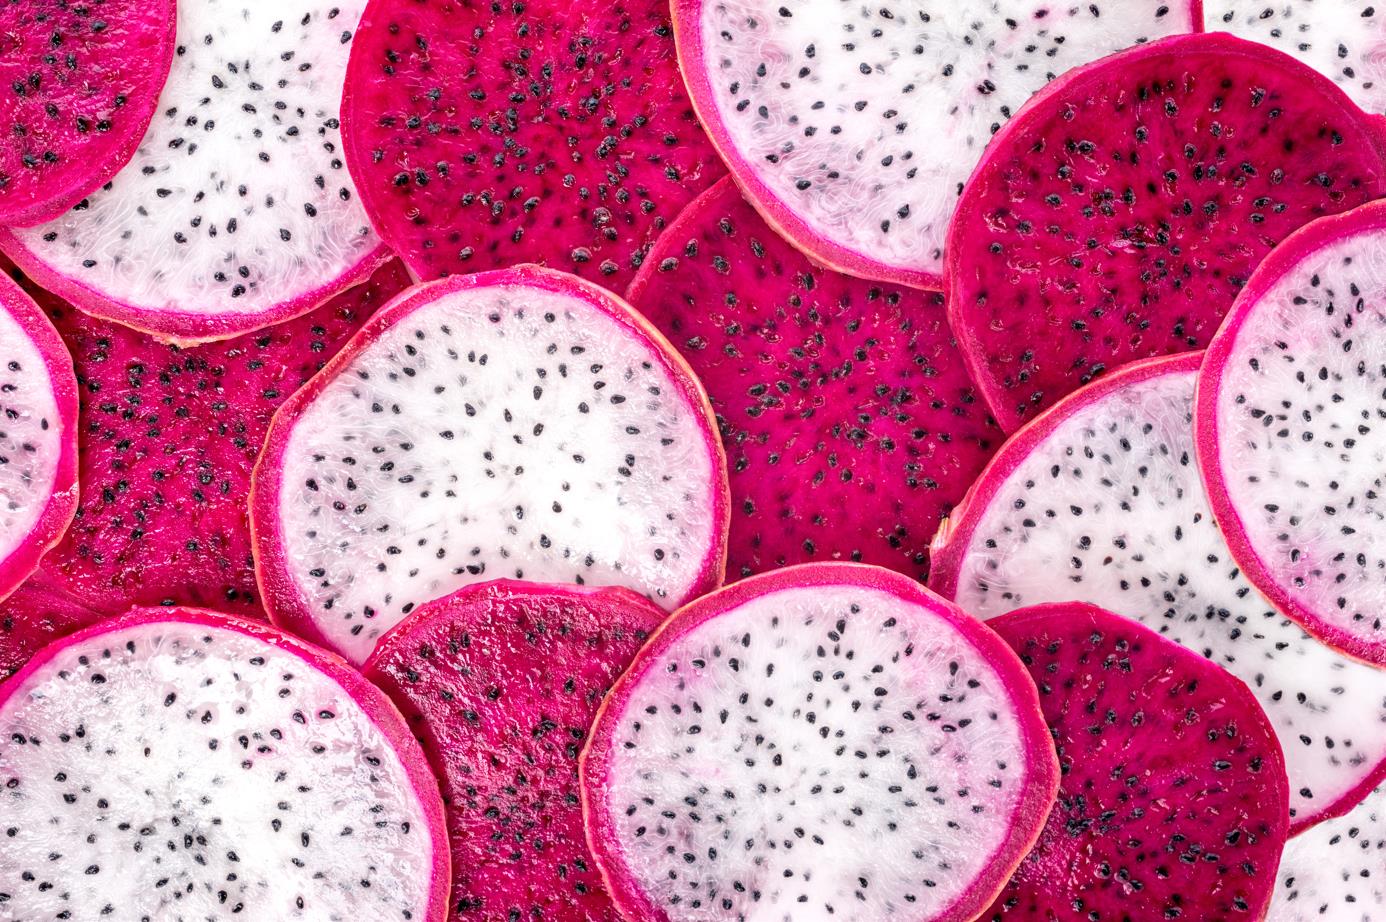 How to Cut Dragon Fruit and Eat It After